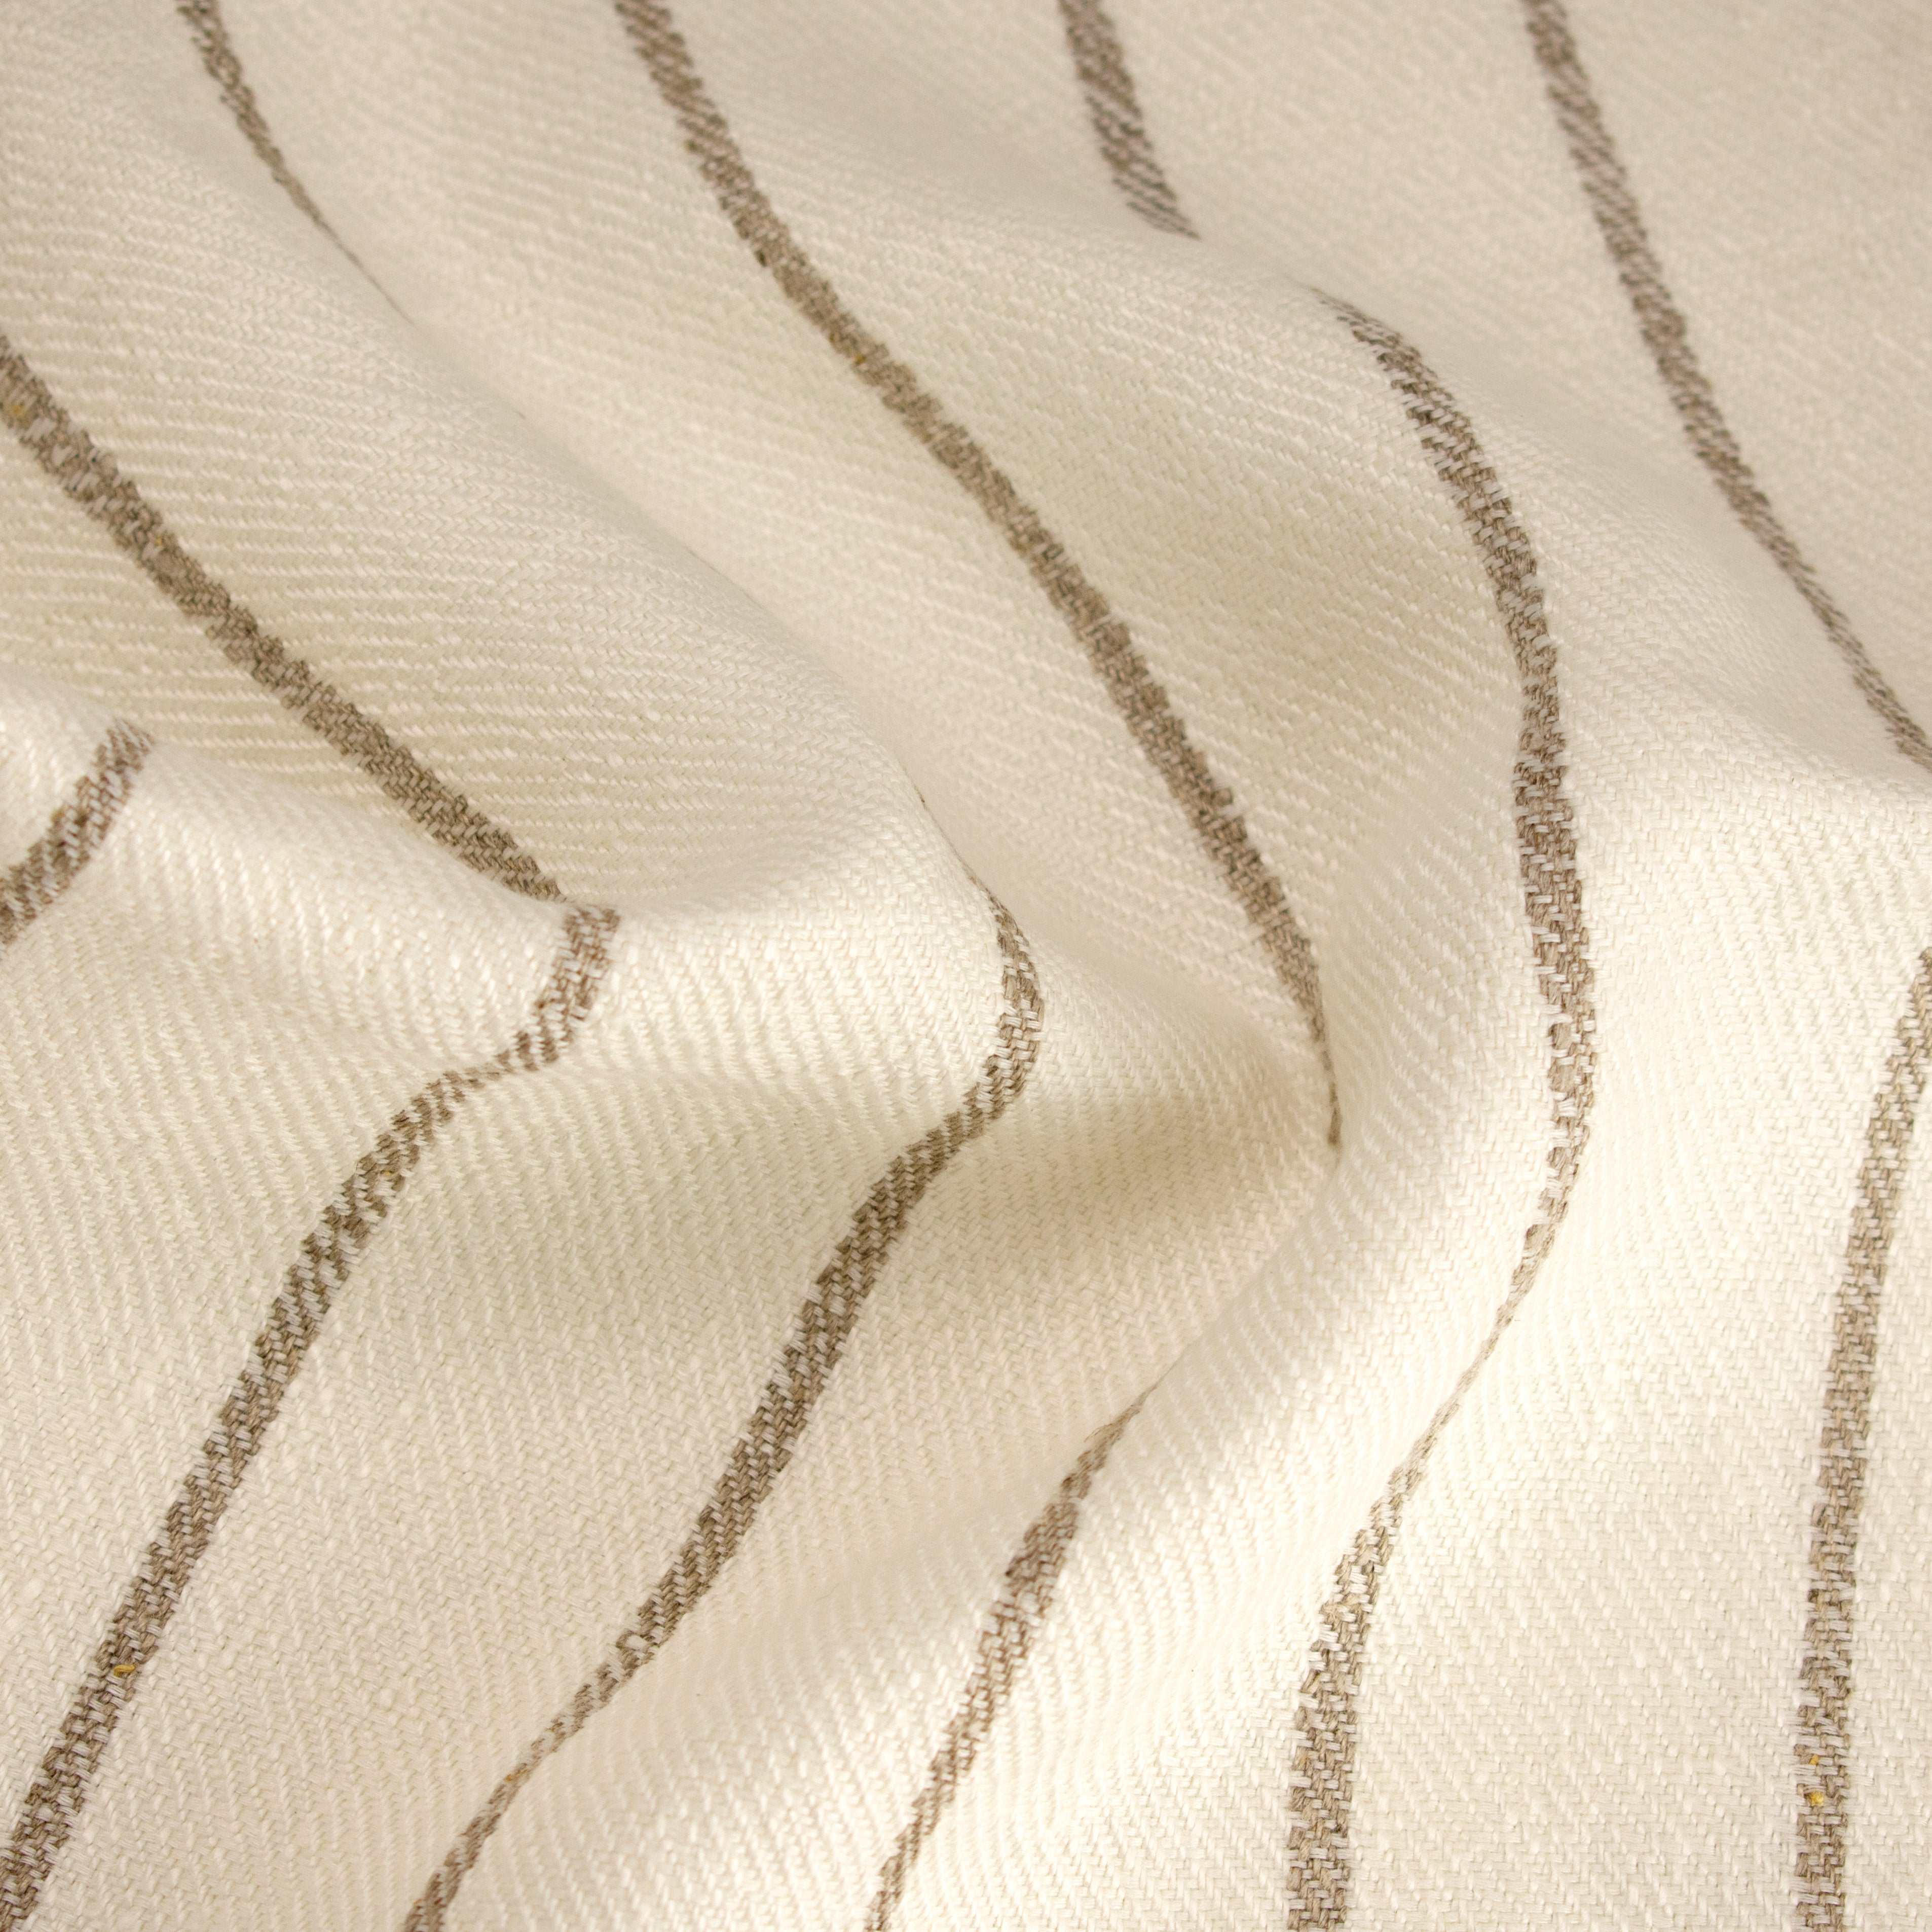 Ivory with natural stripes